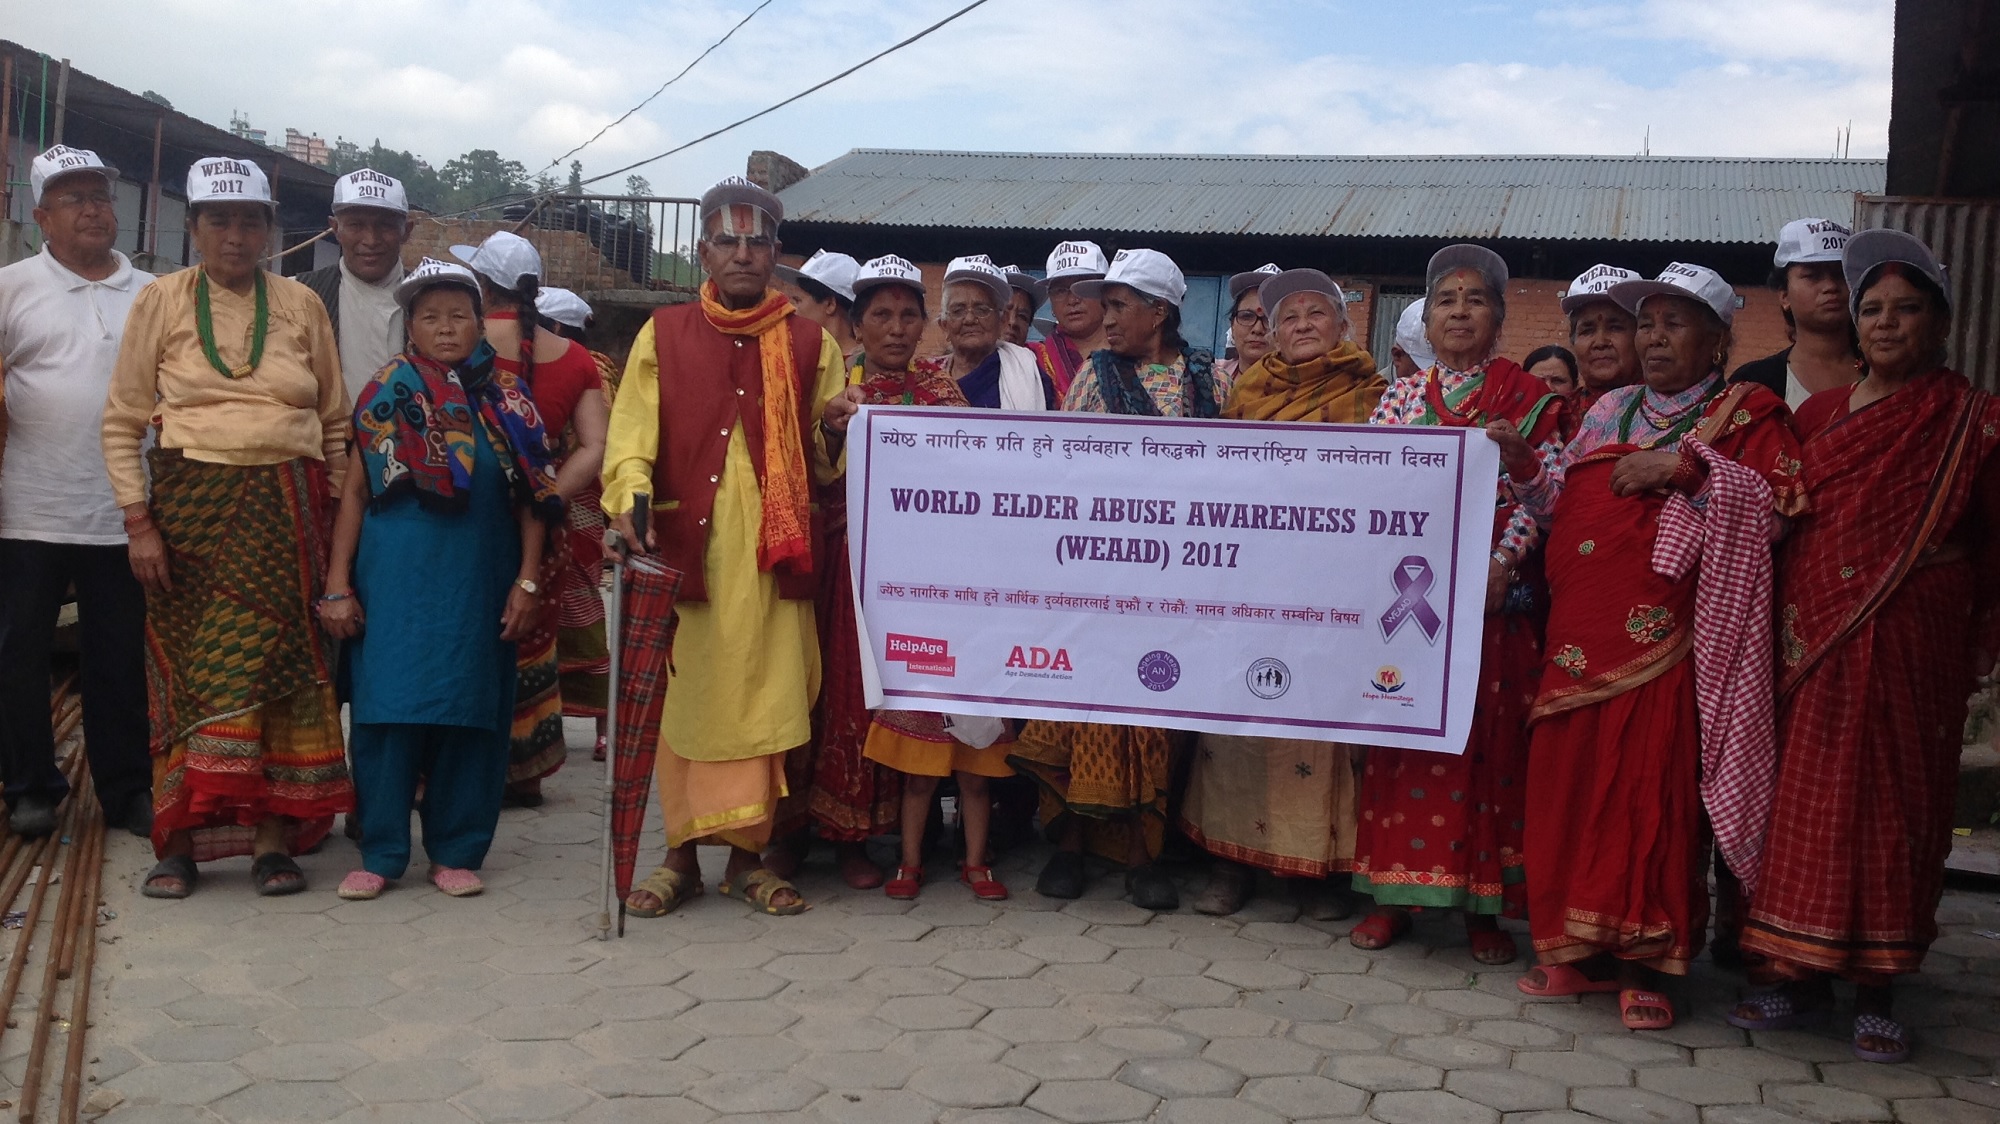  _385_https://www.helpage.org/silo/images/ageing-nepal-world-elder-abuse-awareness-day-rally-2017_2000x1124.jpg